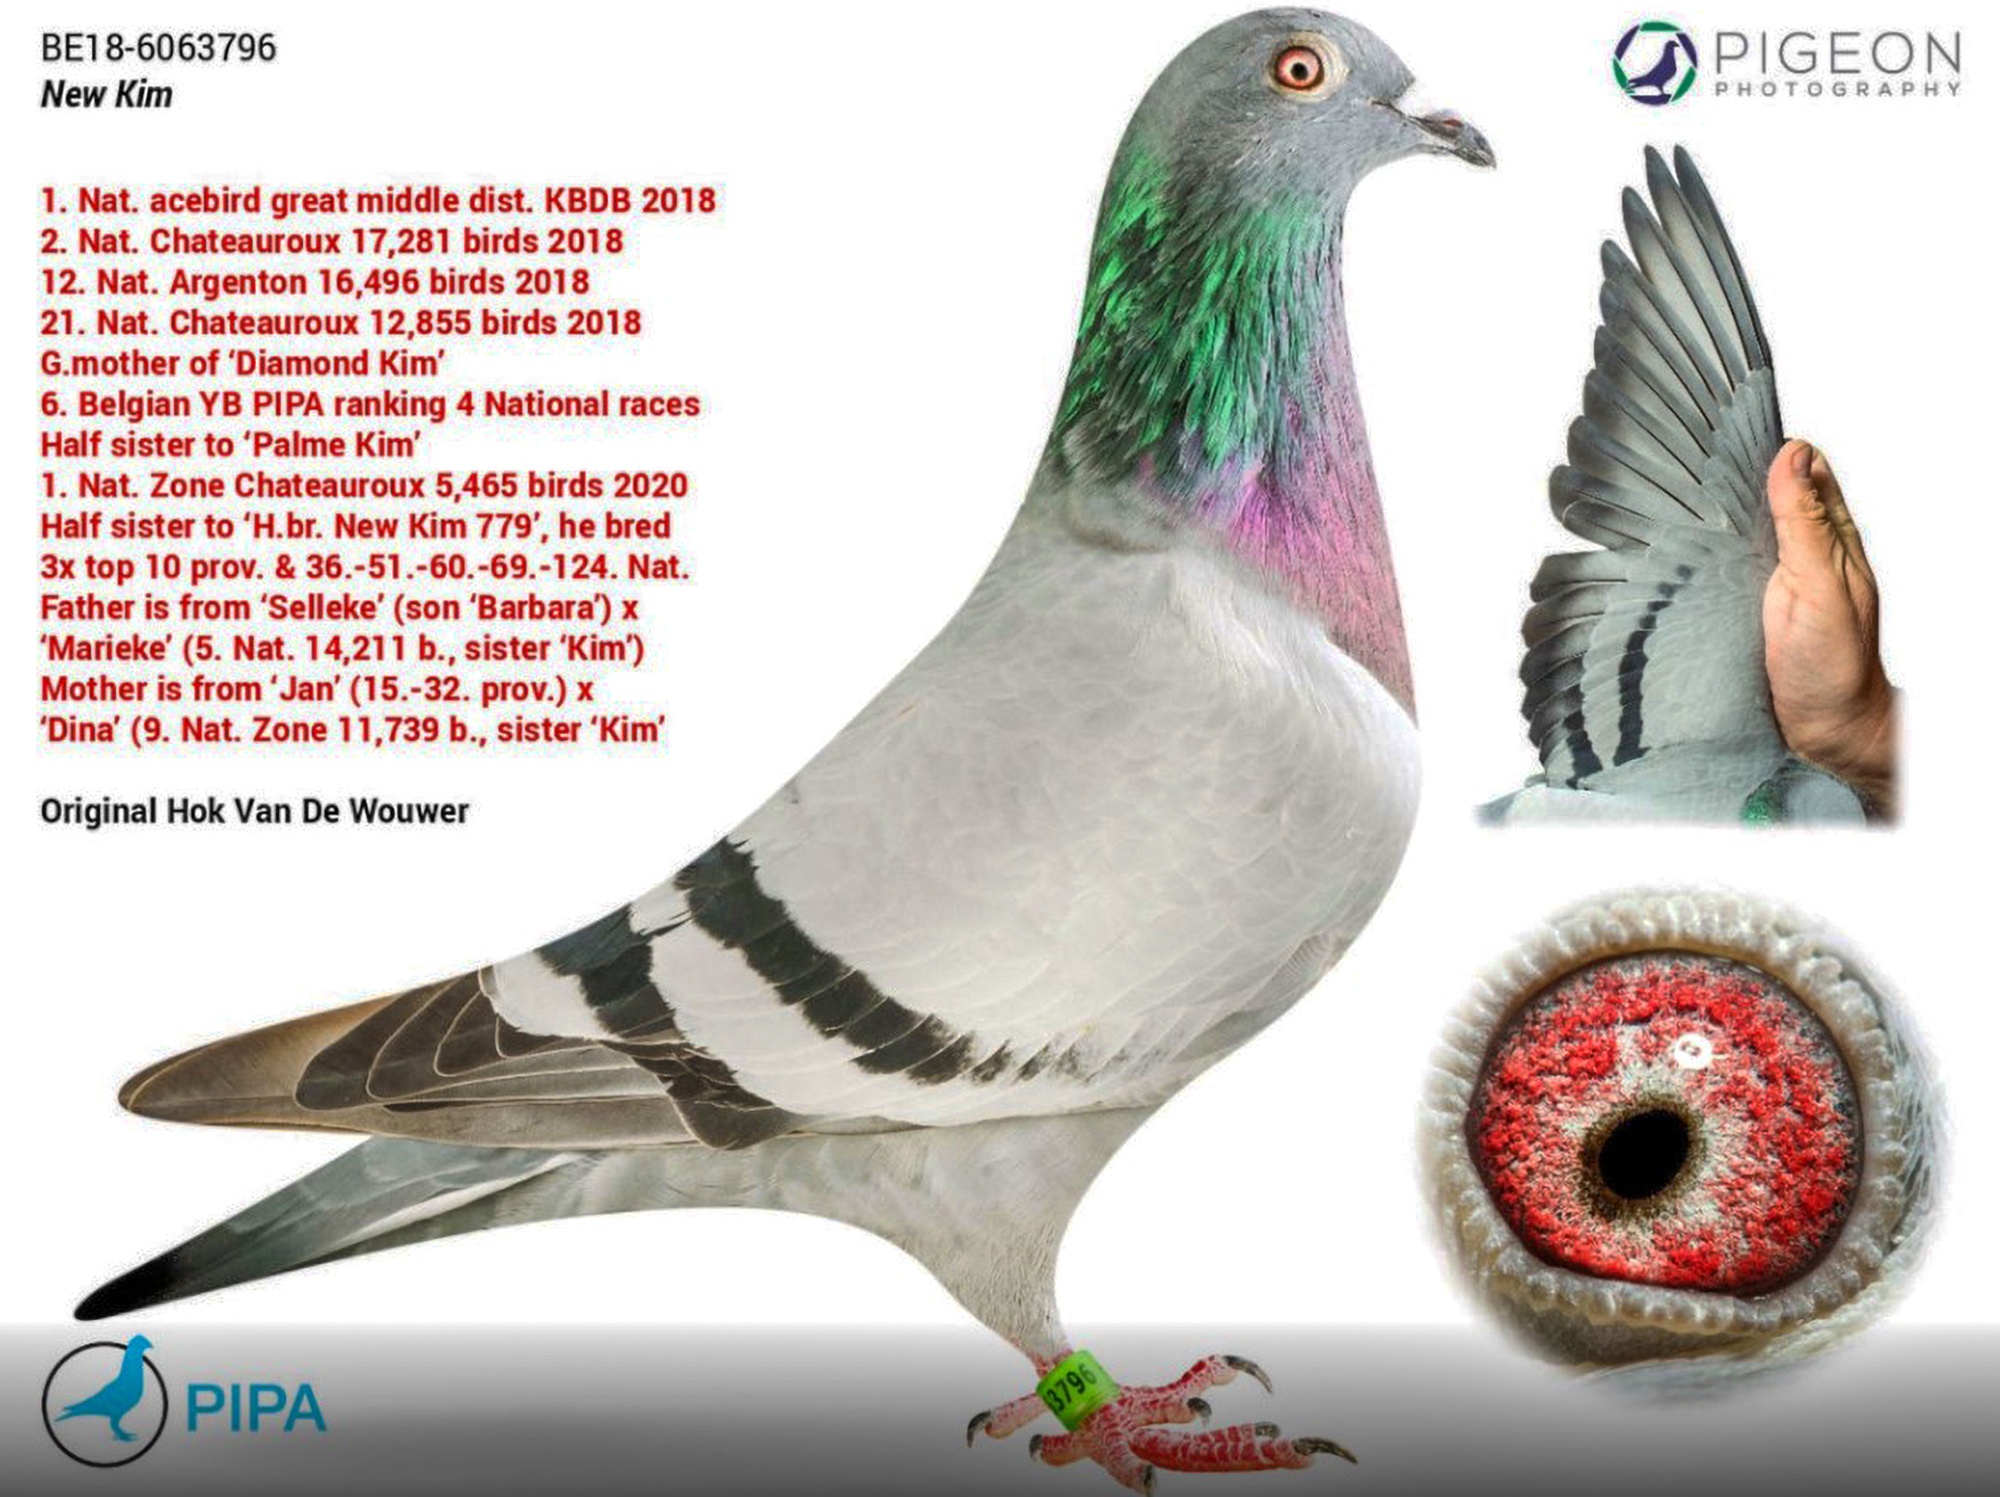 Record GBP 1.4M Paid For Champion Pigeon At Auction